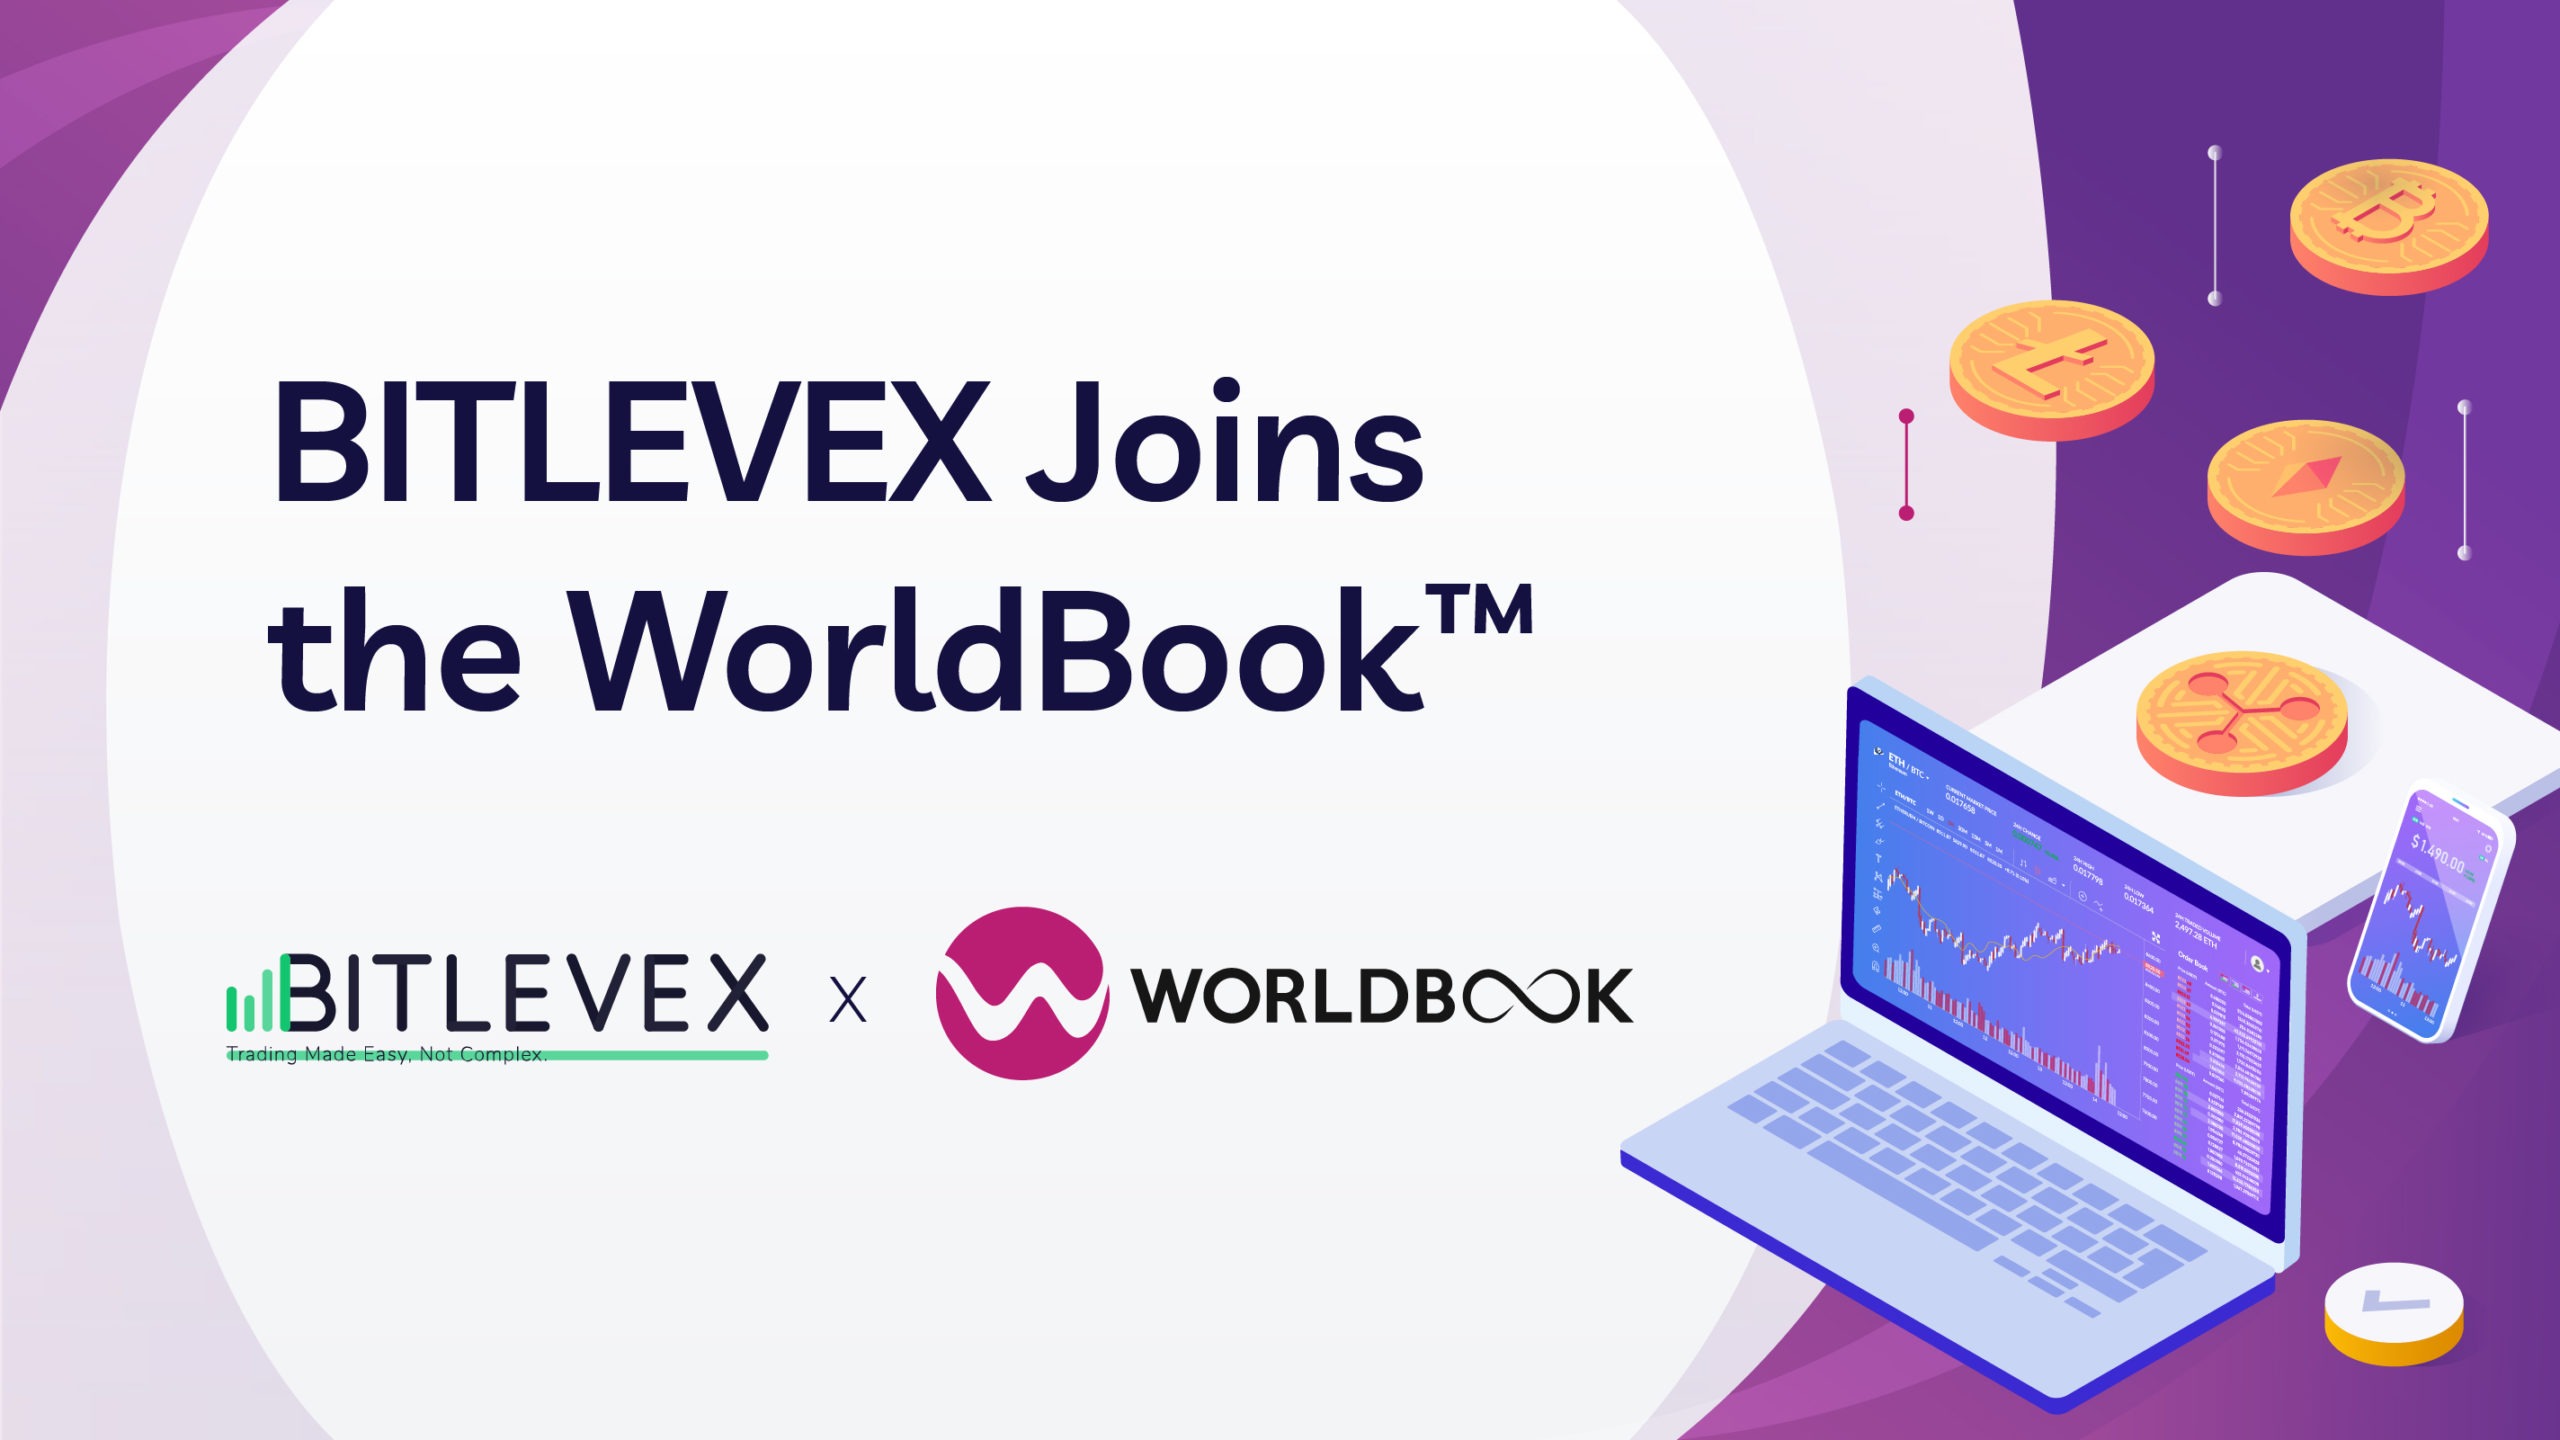 BITLEVEX, an Option-Focused Trading Platform, Joins the WorldBook™